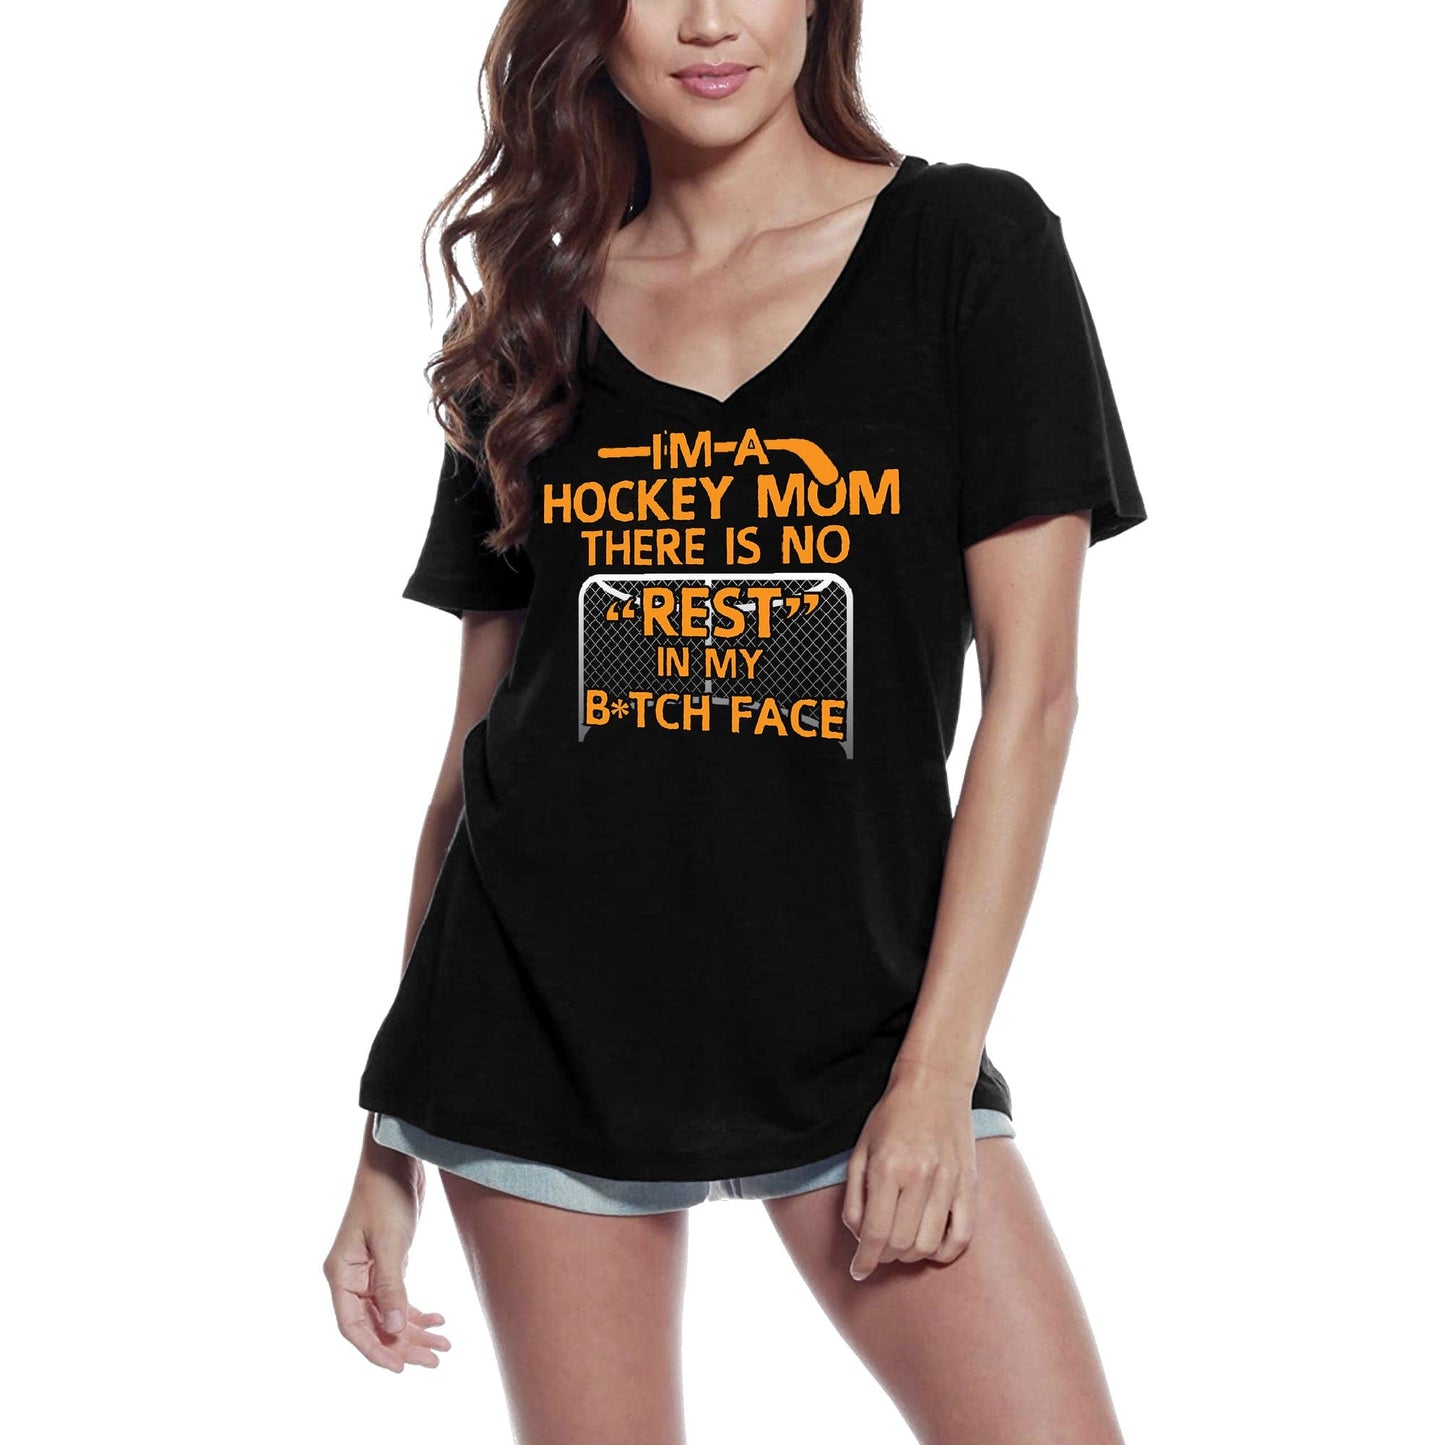 ULTRABASIC Women's T-Shirt I'm a Hockey Mom There is No Rest in My Face - Funny Tee Shirt